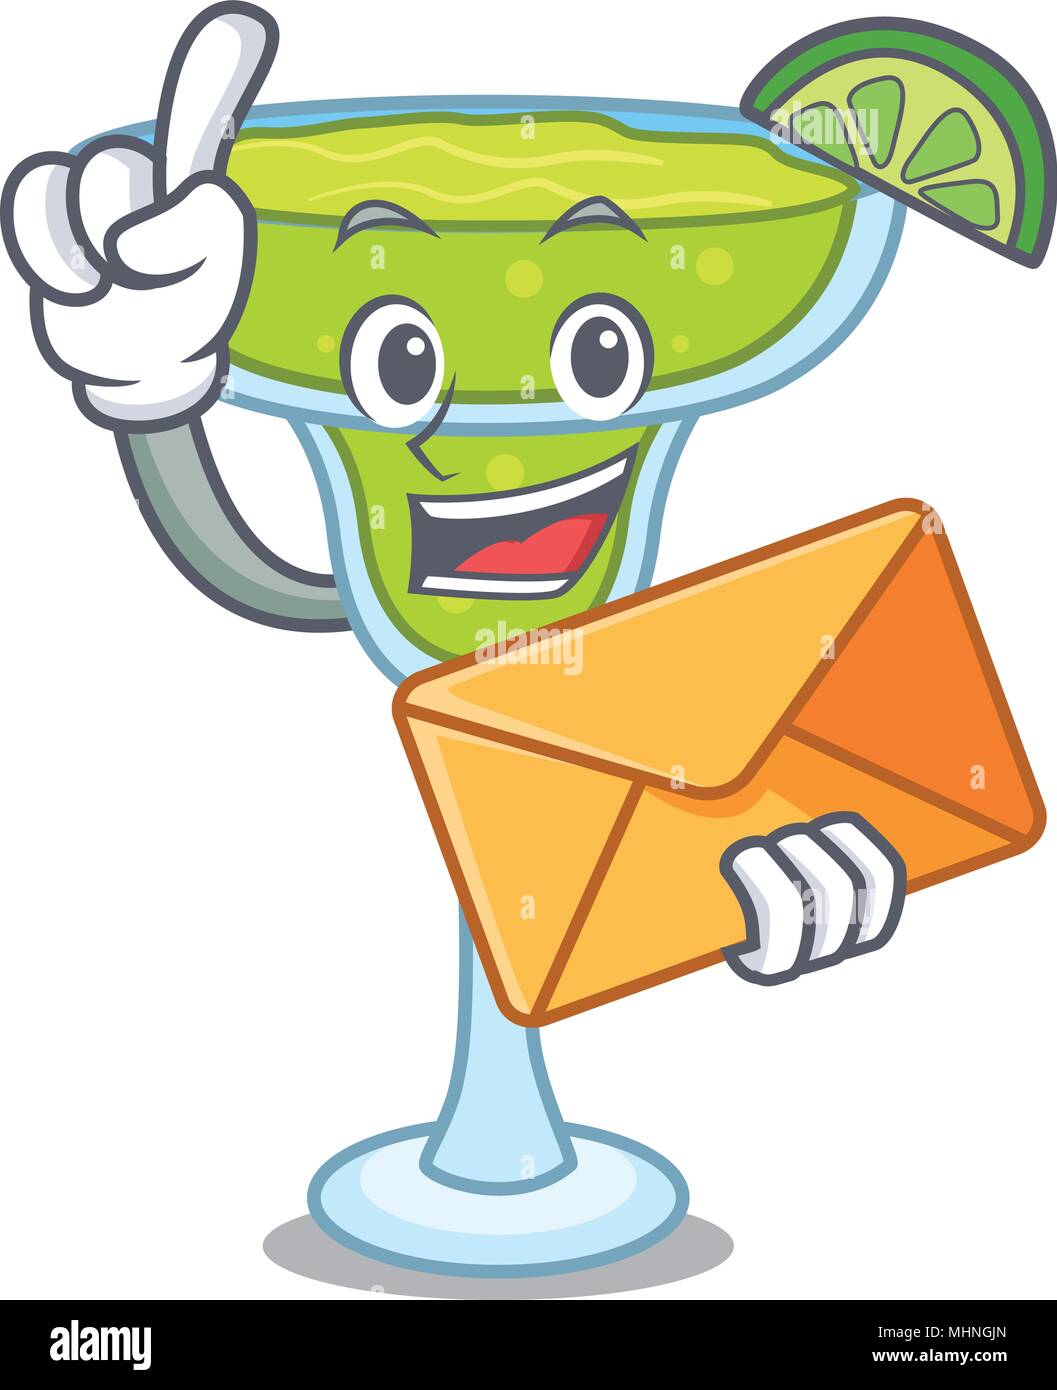 With envelope margarita character cartoon style vector illustration Stock Vector